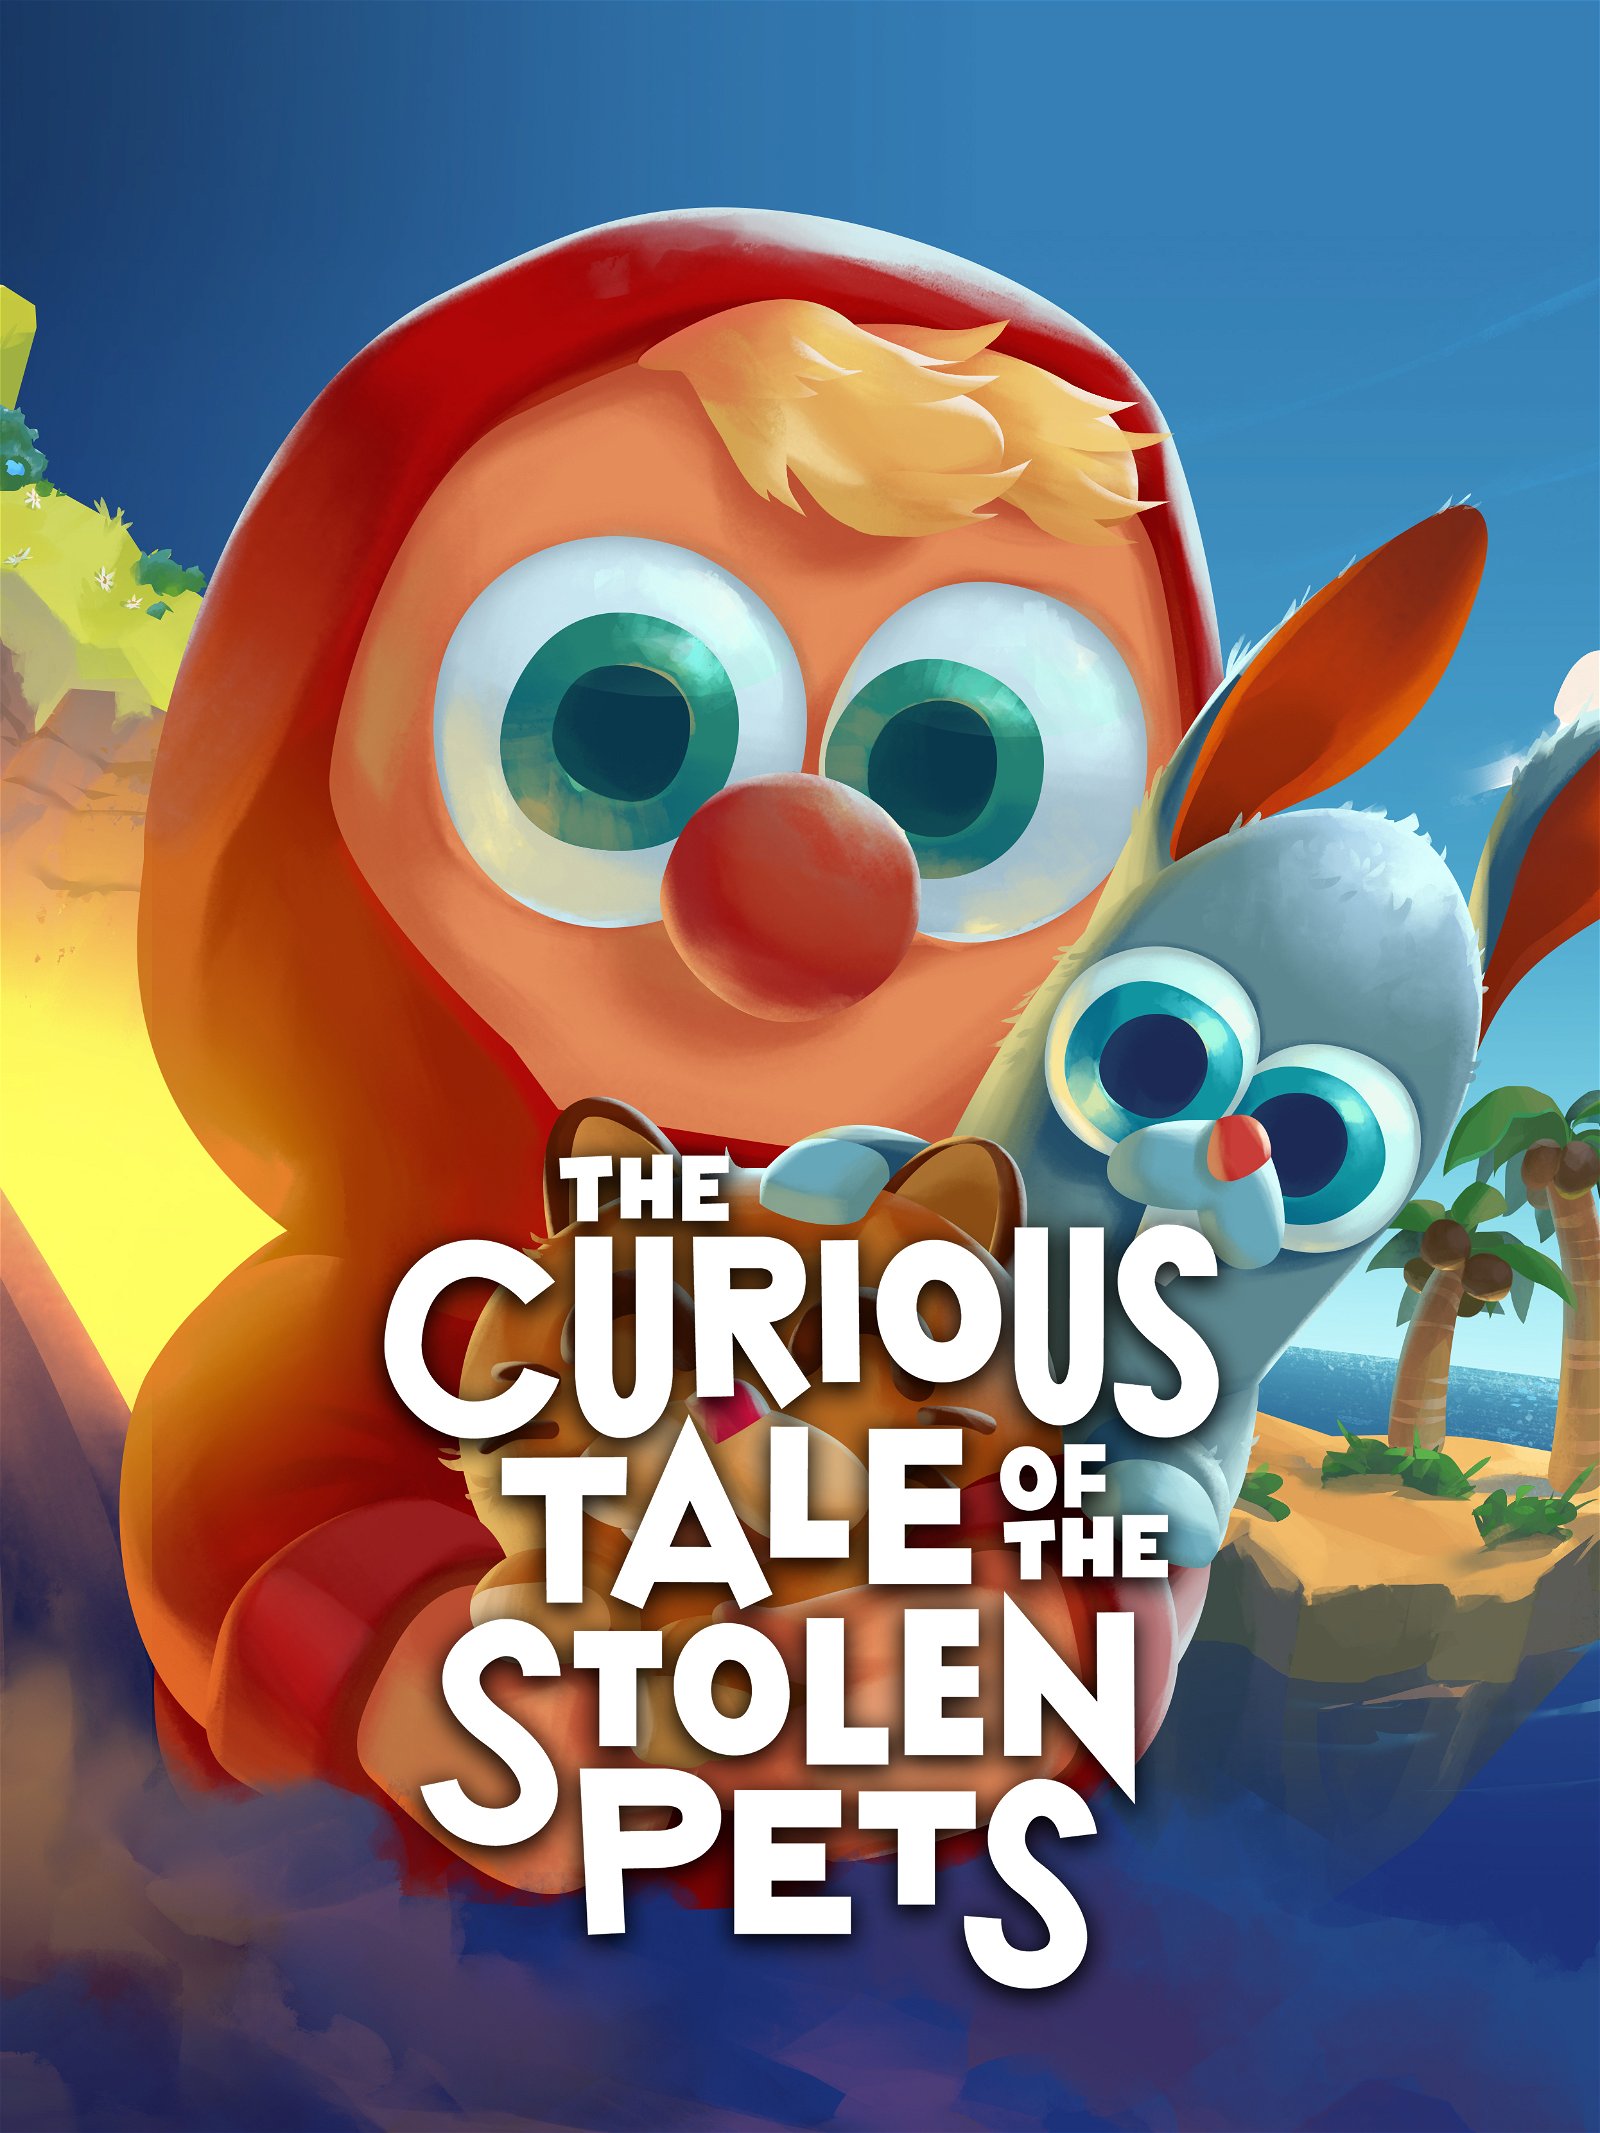 Image of The curious tale of the stolen pets